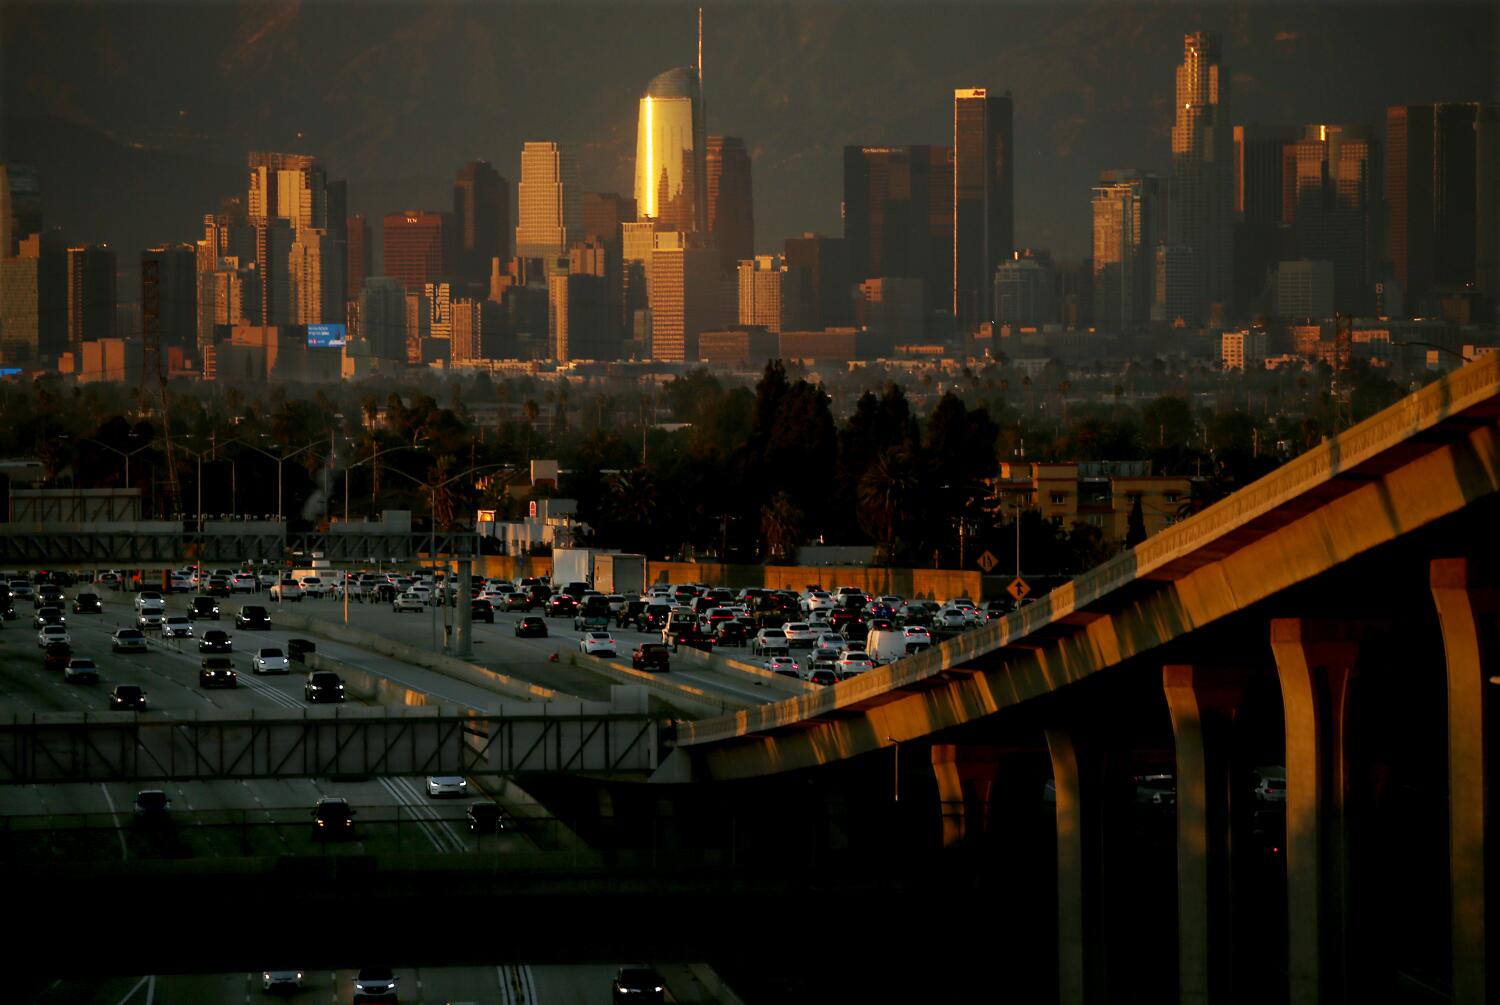 Southern California wood-burning ban extended as 'lid' locks in hazy, polluted air